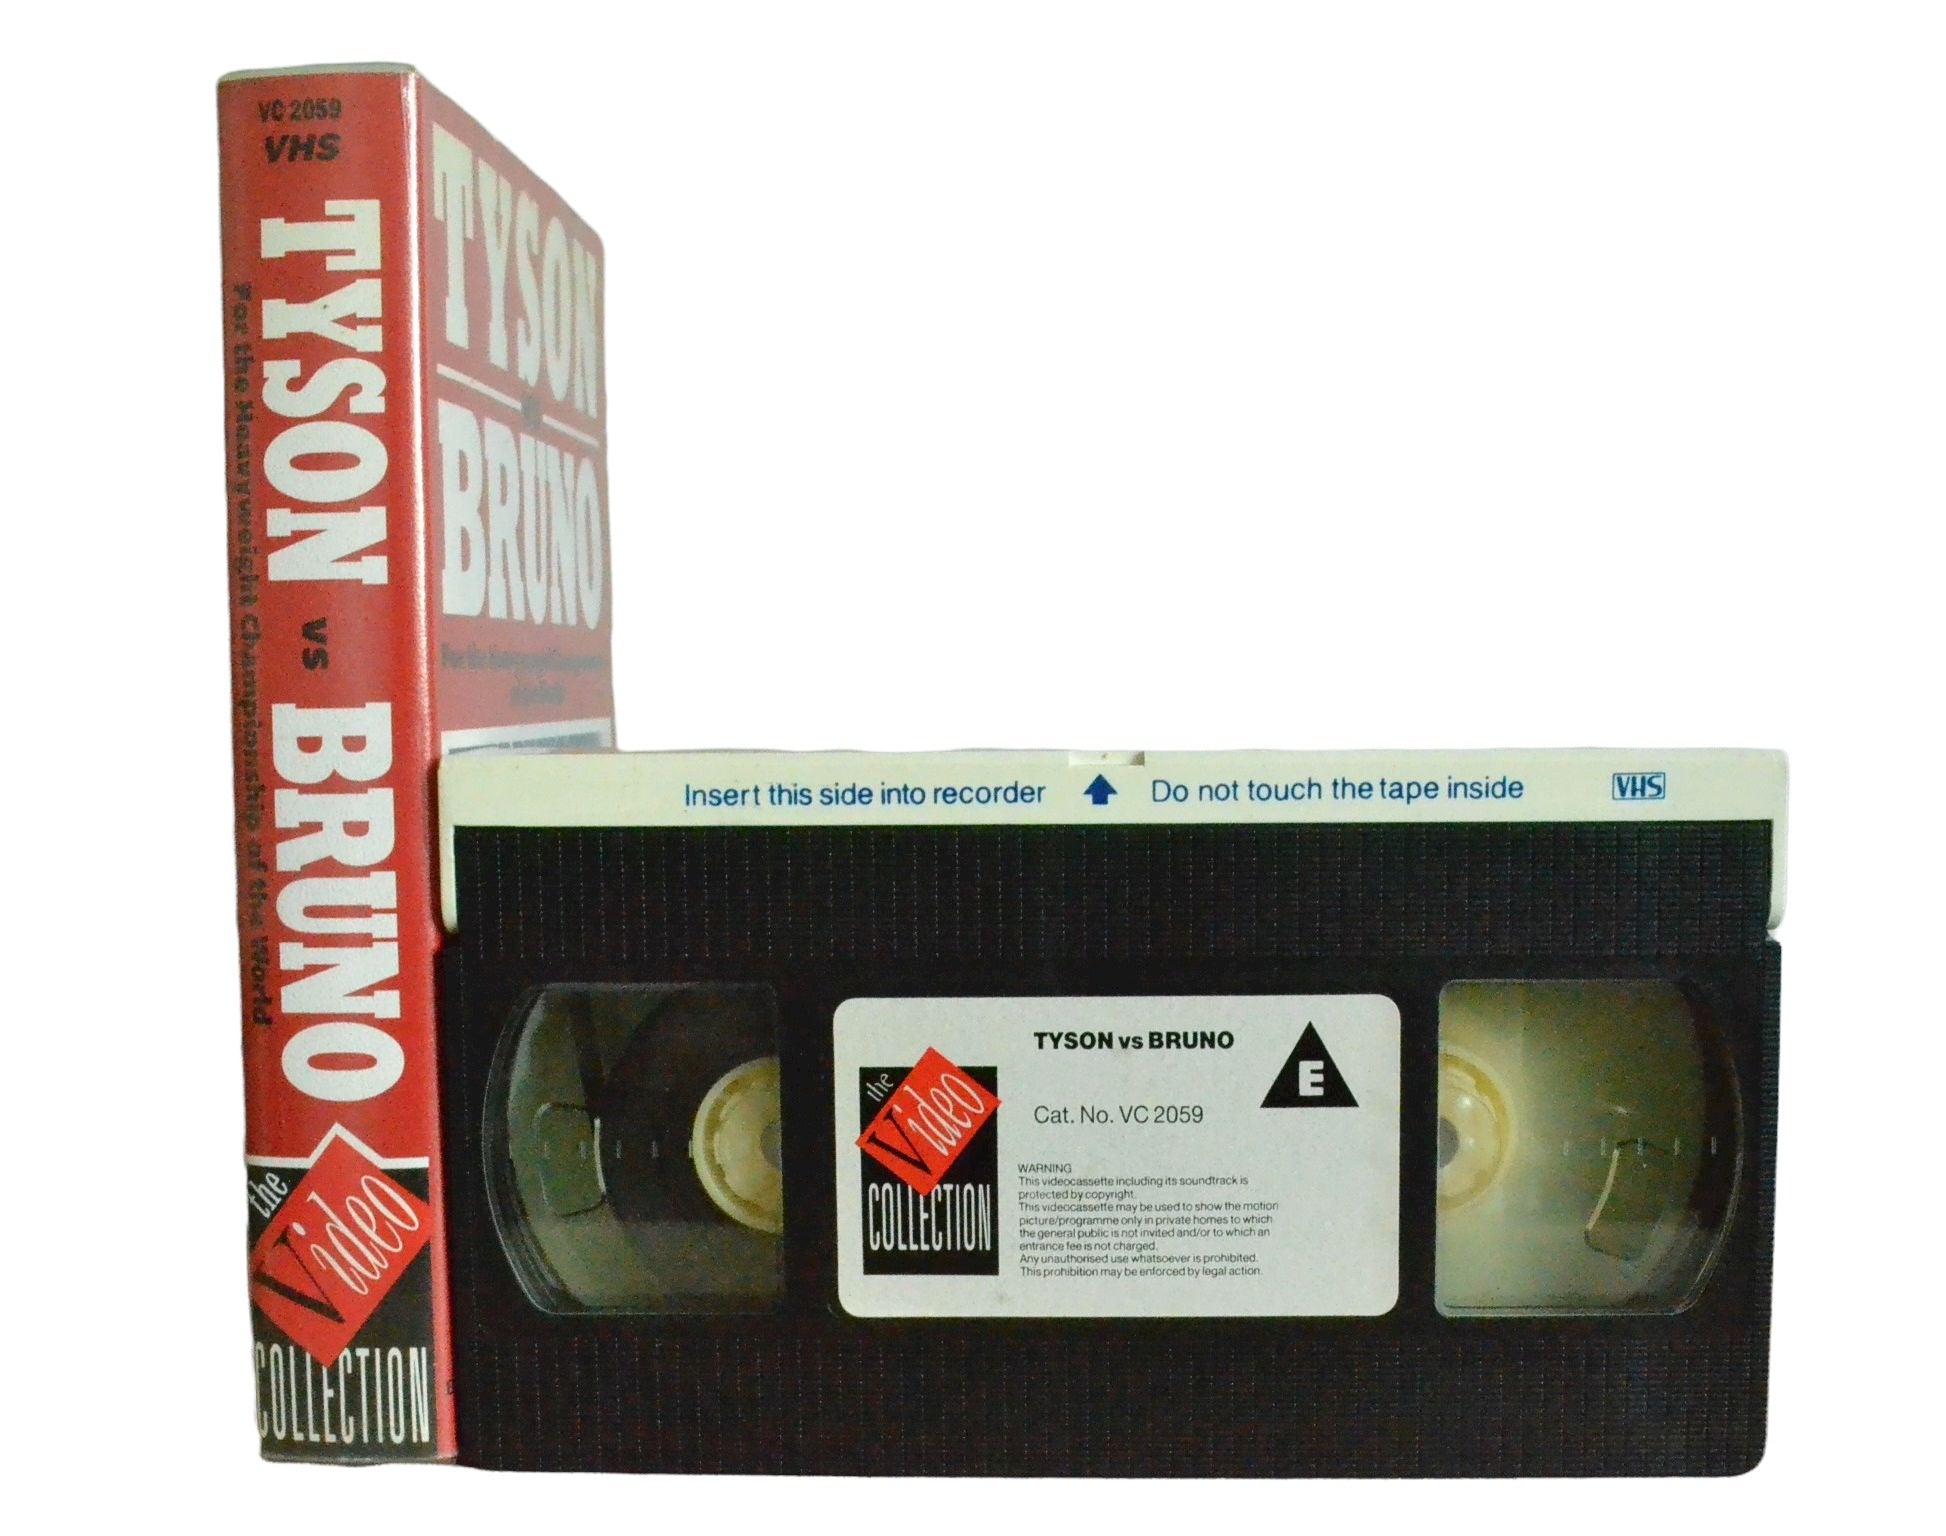 Tyson Vs Bruno - For The Heavyweight Championship Of The World - Mike Tyson - The Video Collection - Boxing - Pal VHS-